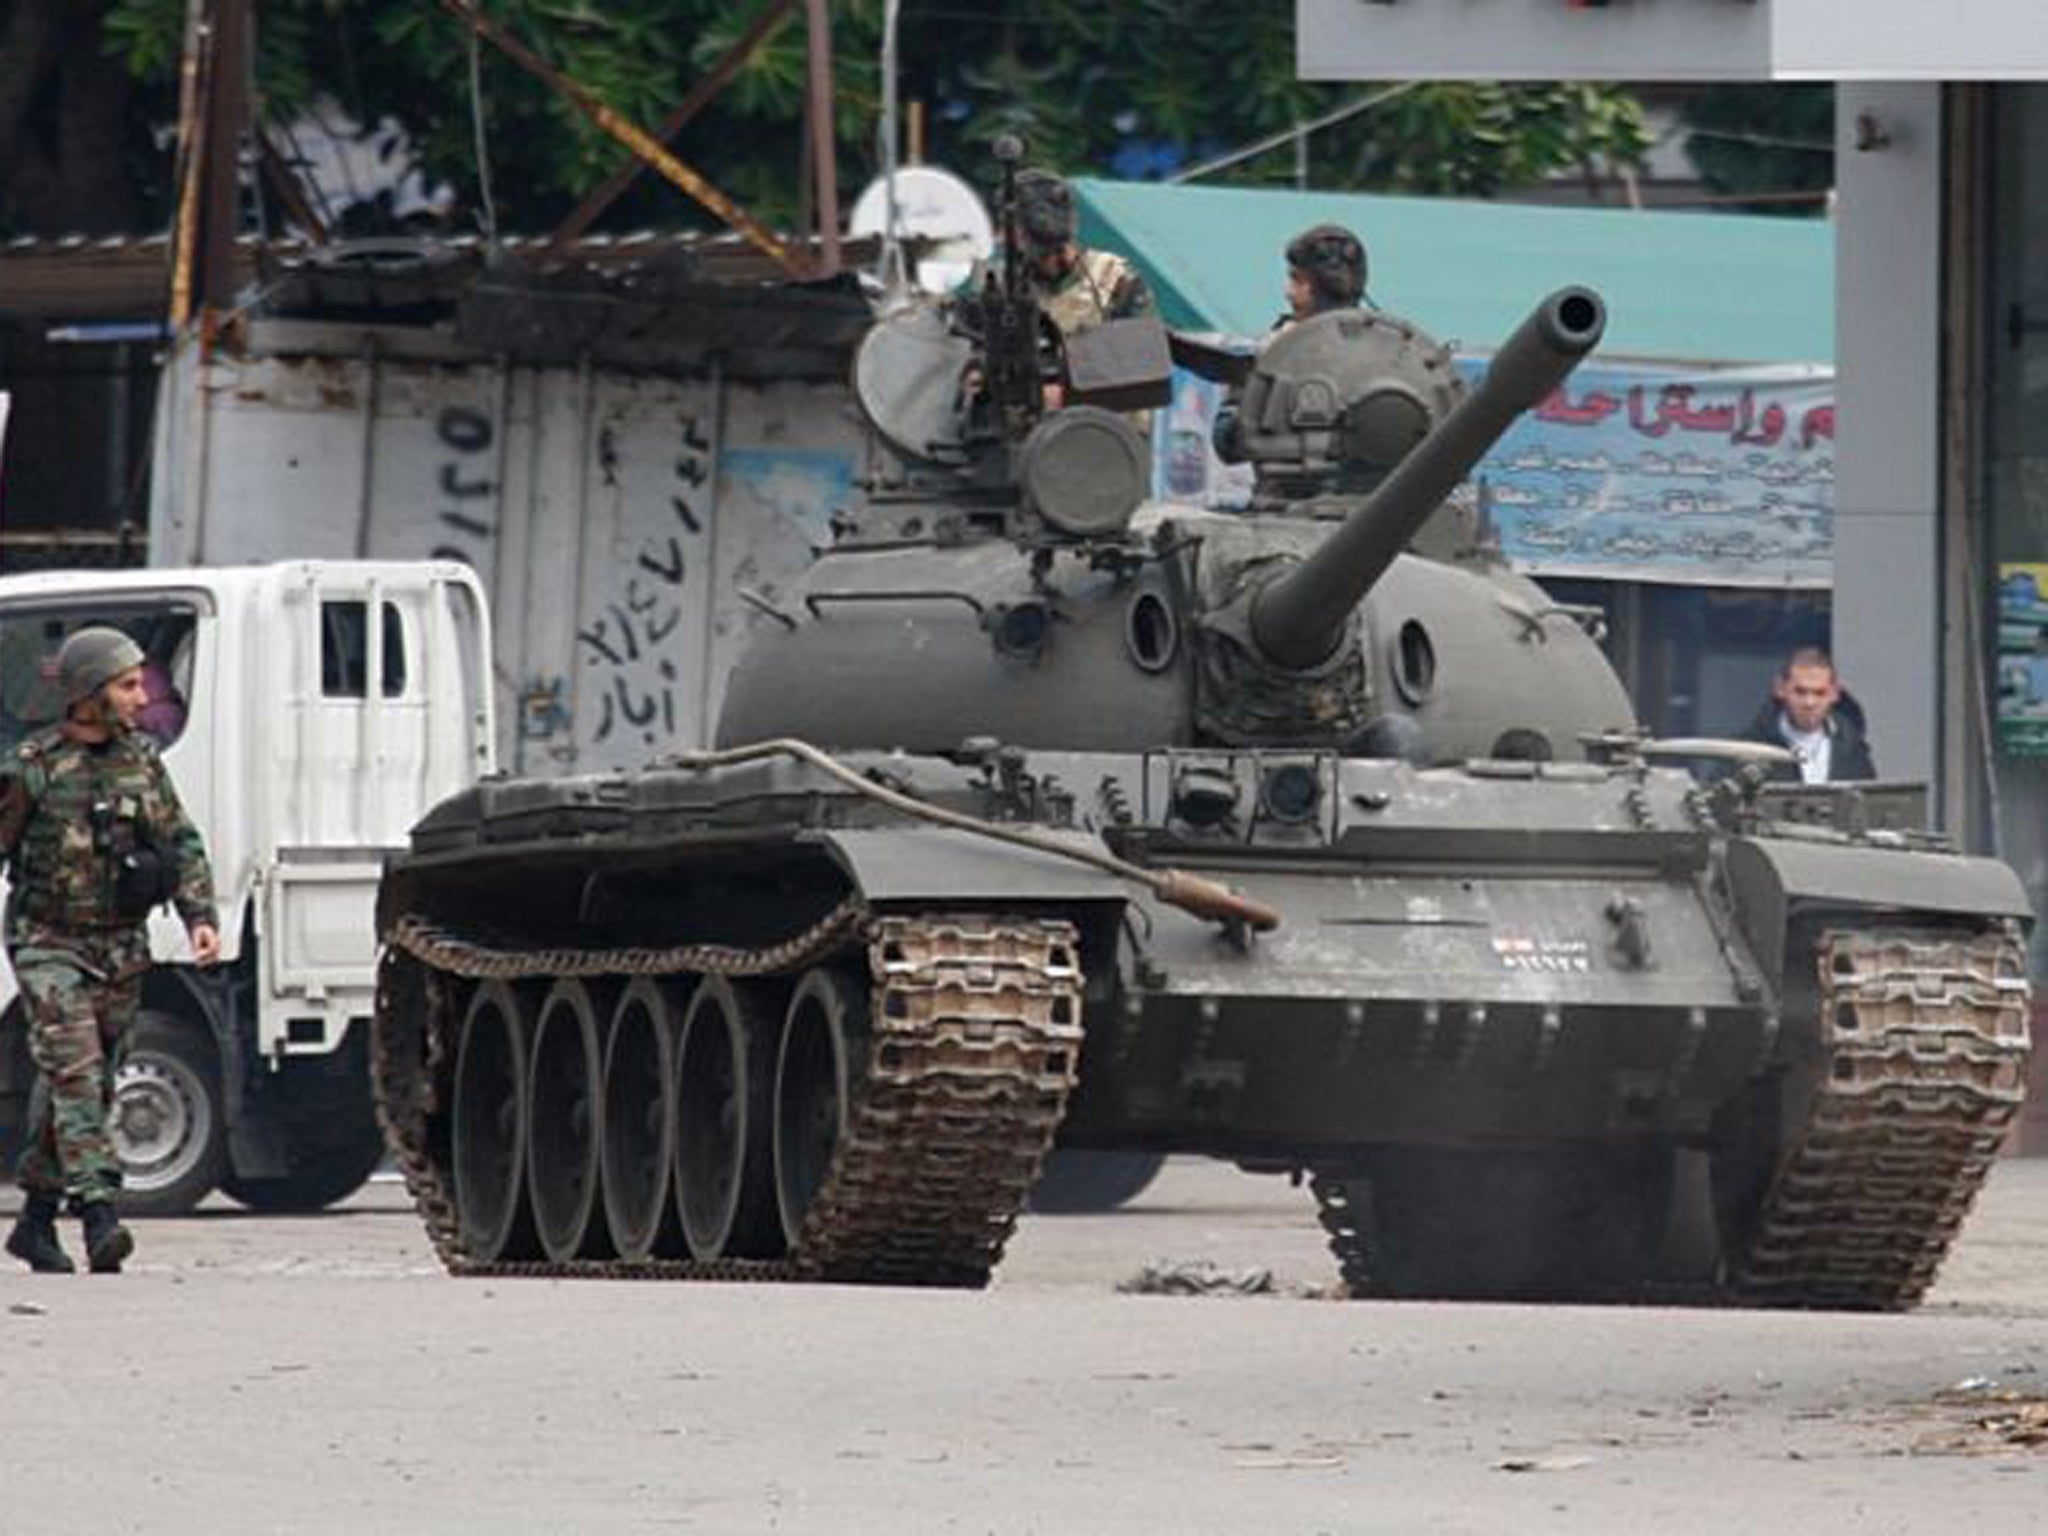 Lebanese army soldiers ride in a tank during the clashes erupted in Tripoli